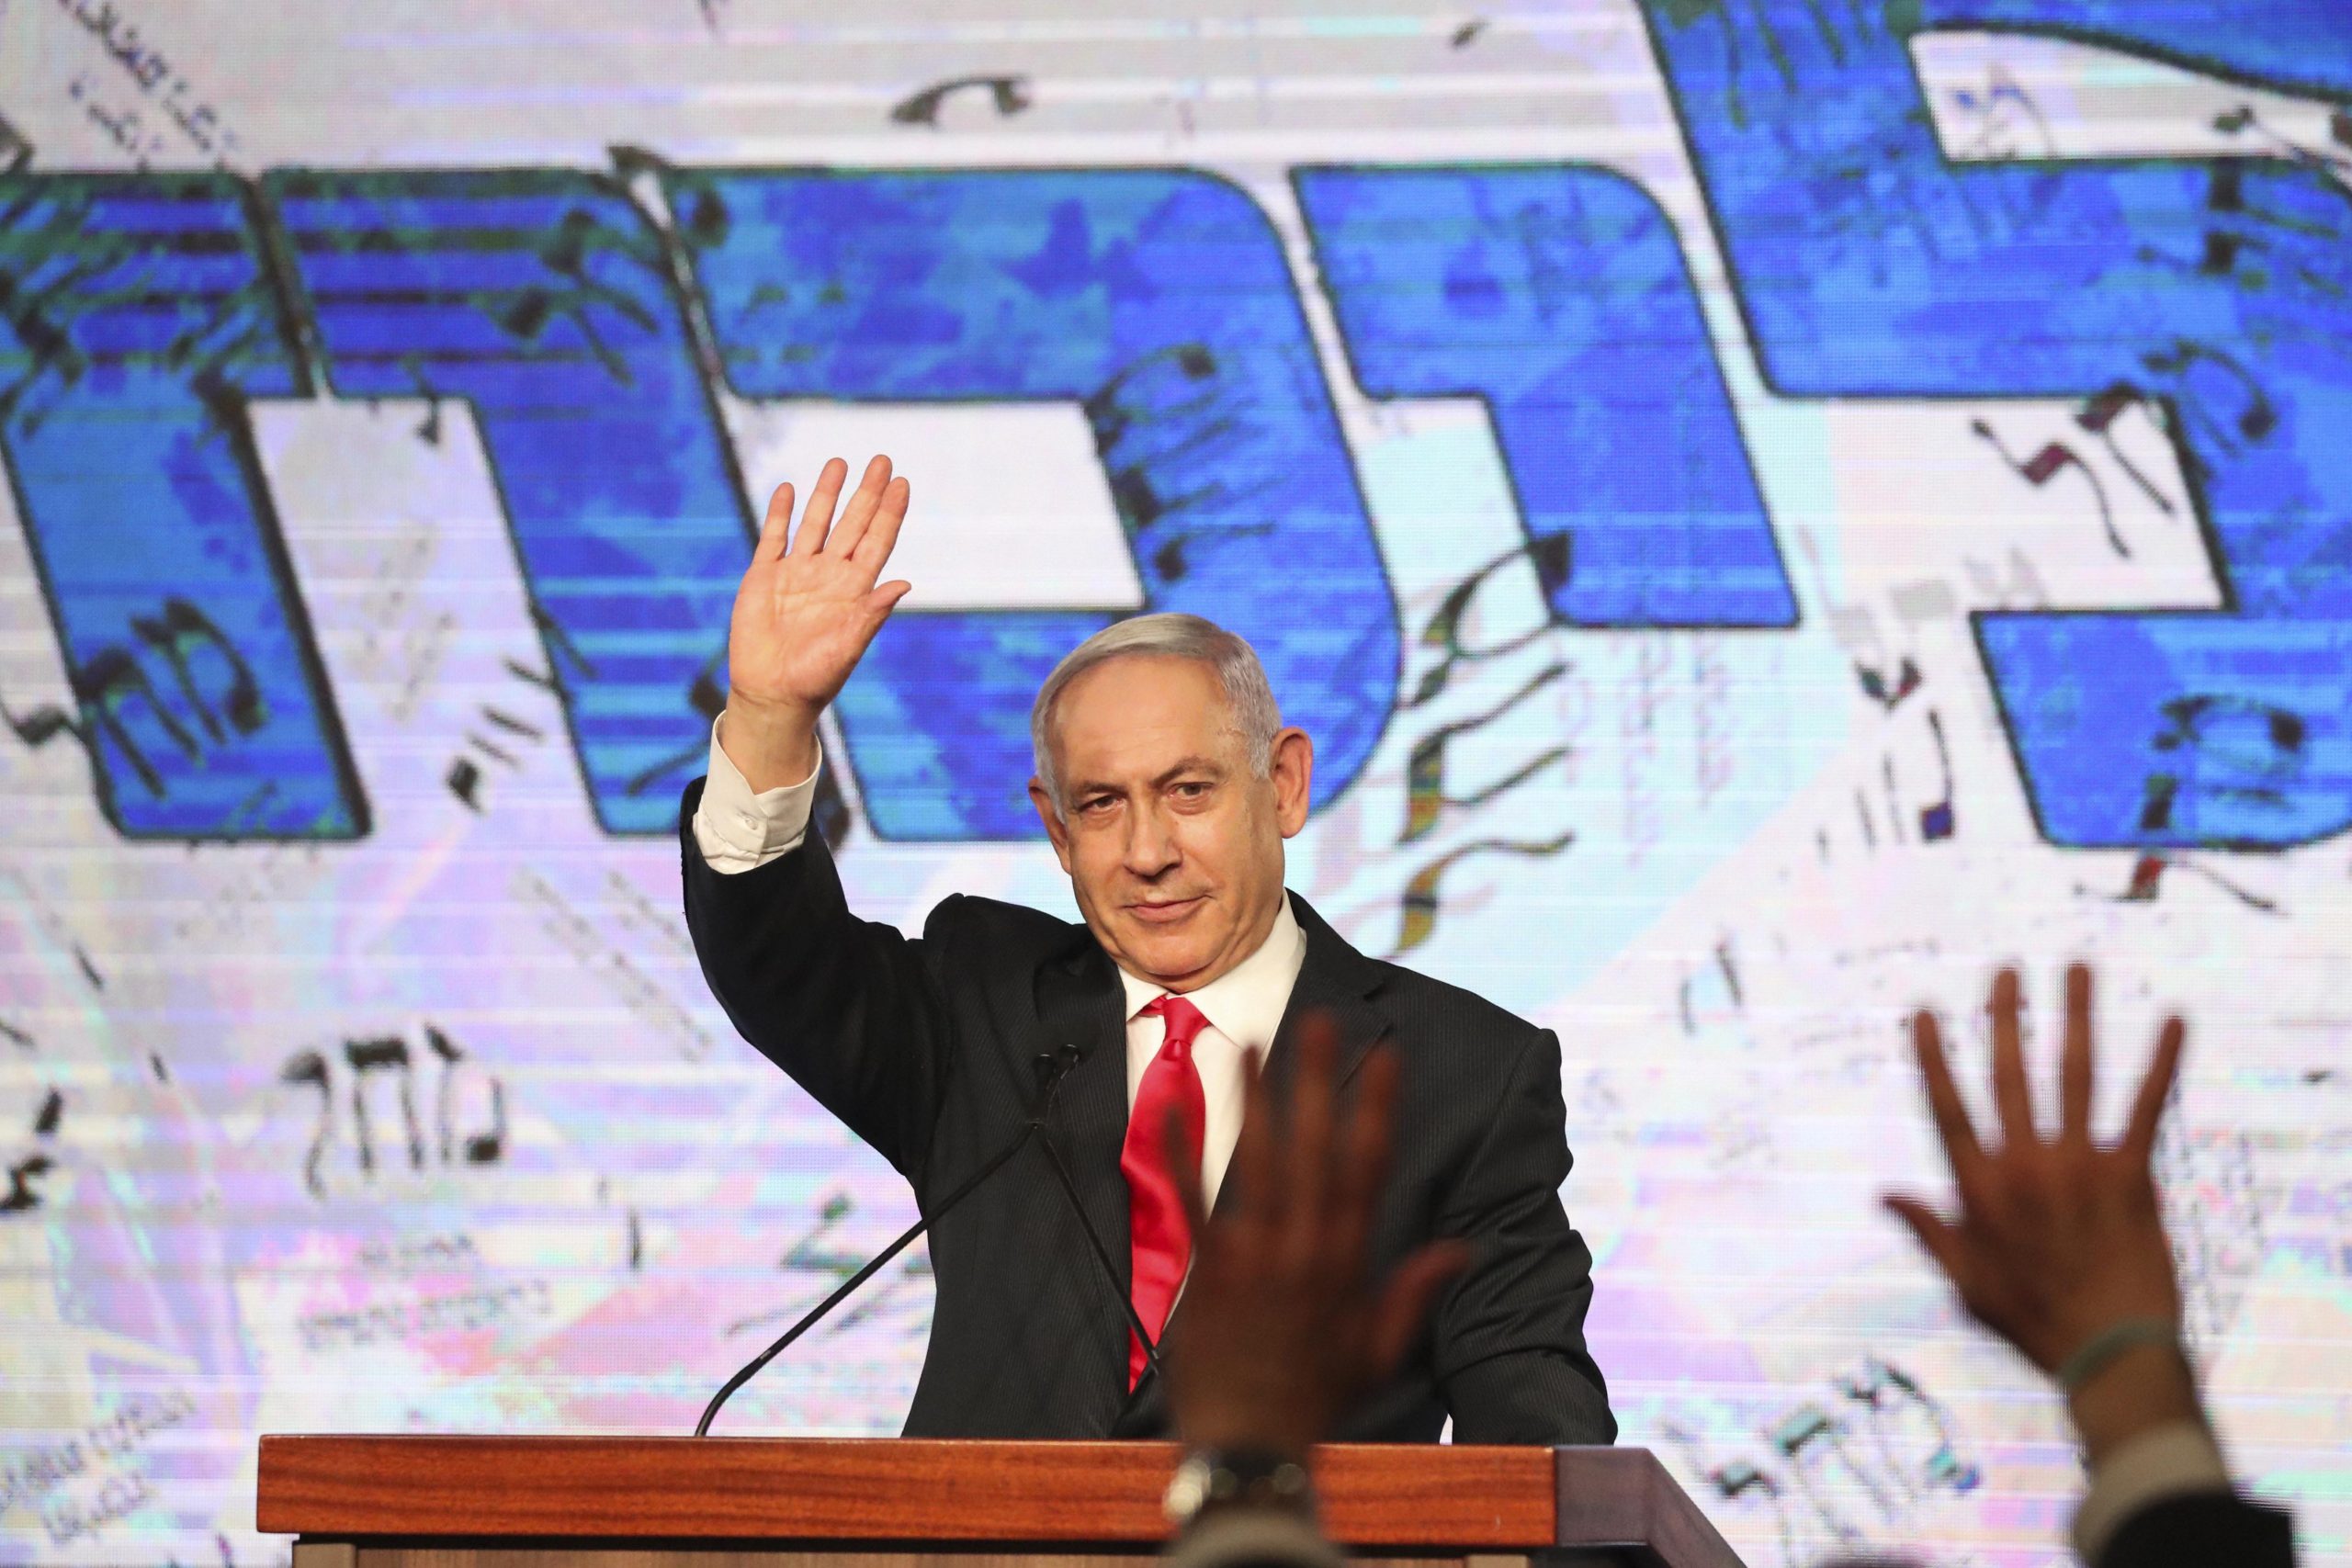 Conquer or deter: Israeli PM Benjamin Netanyahu on dealing with Hamas